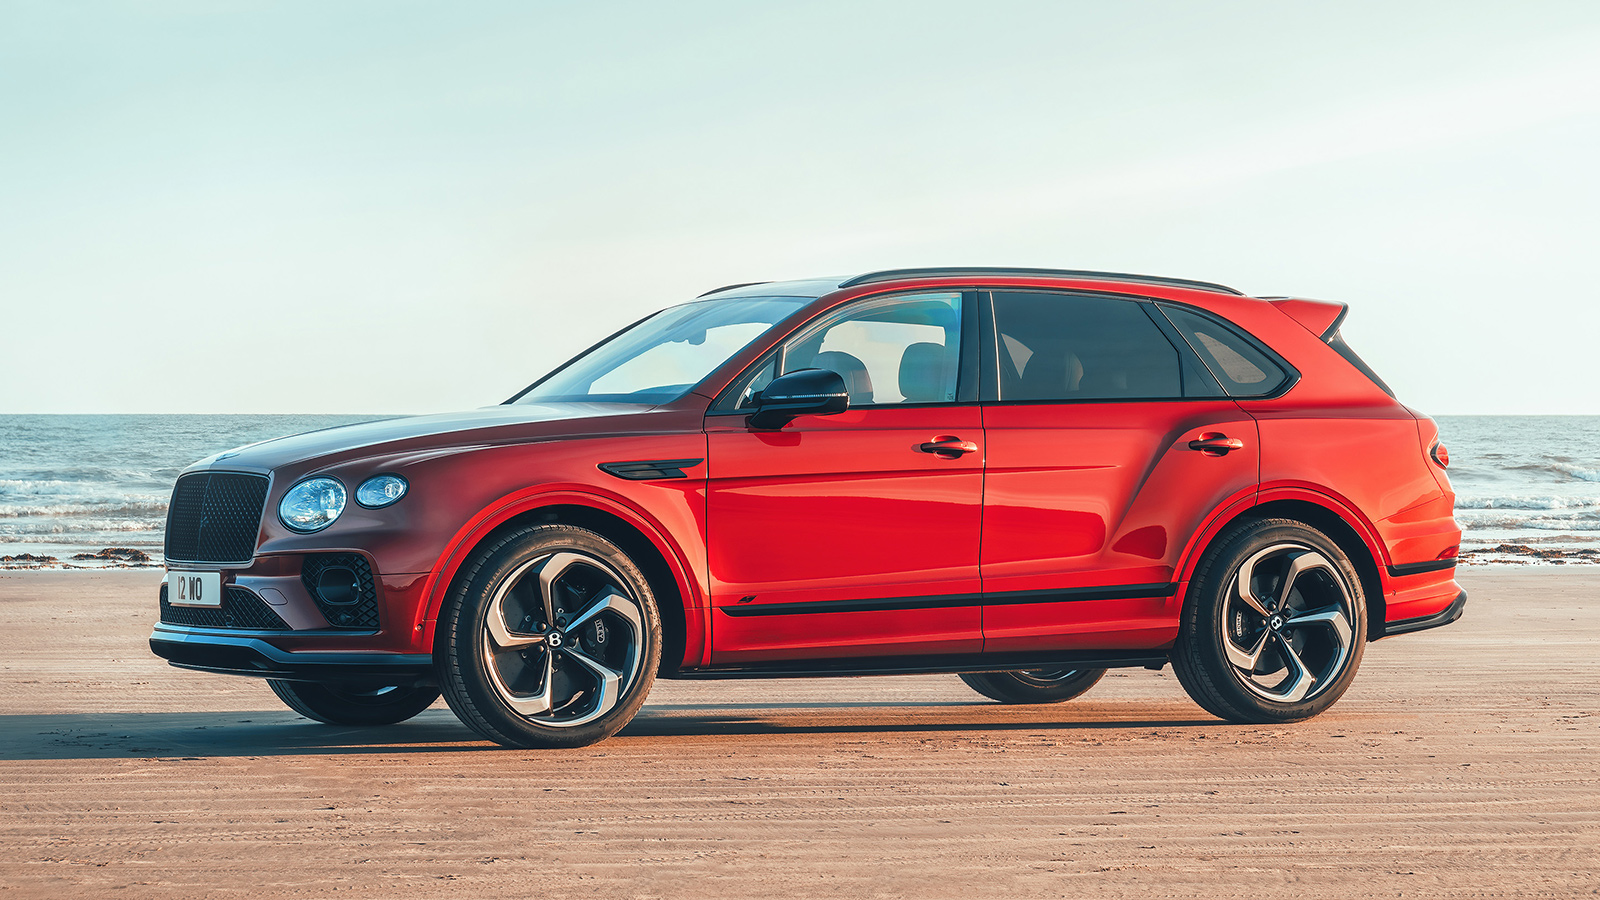 2022 Bentley Bentayga S Is An Ultra-Luxury SUV With Track Shoes And 542